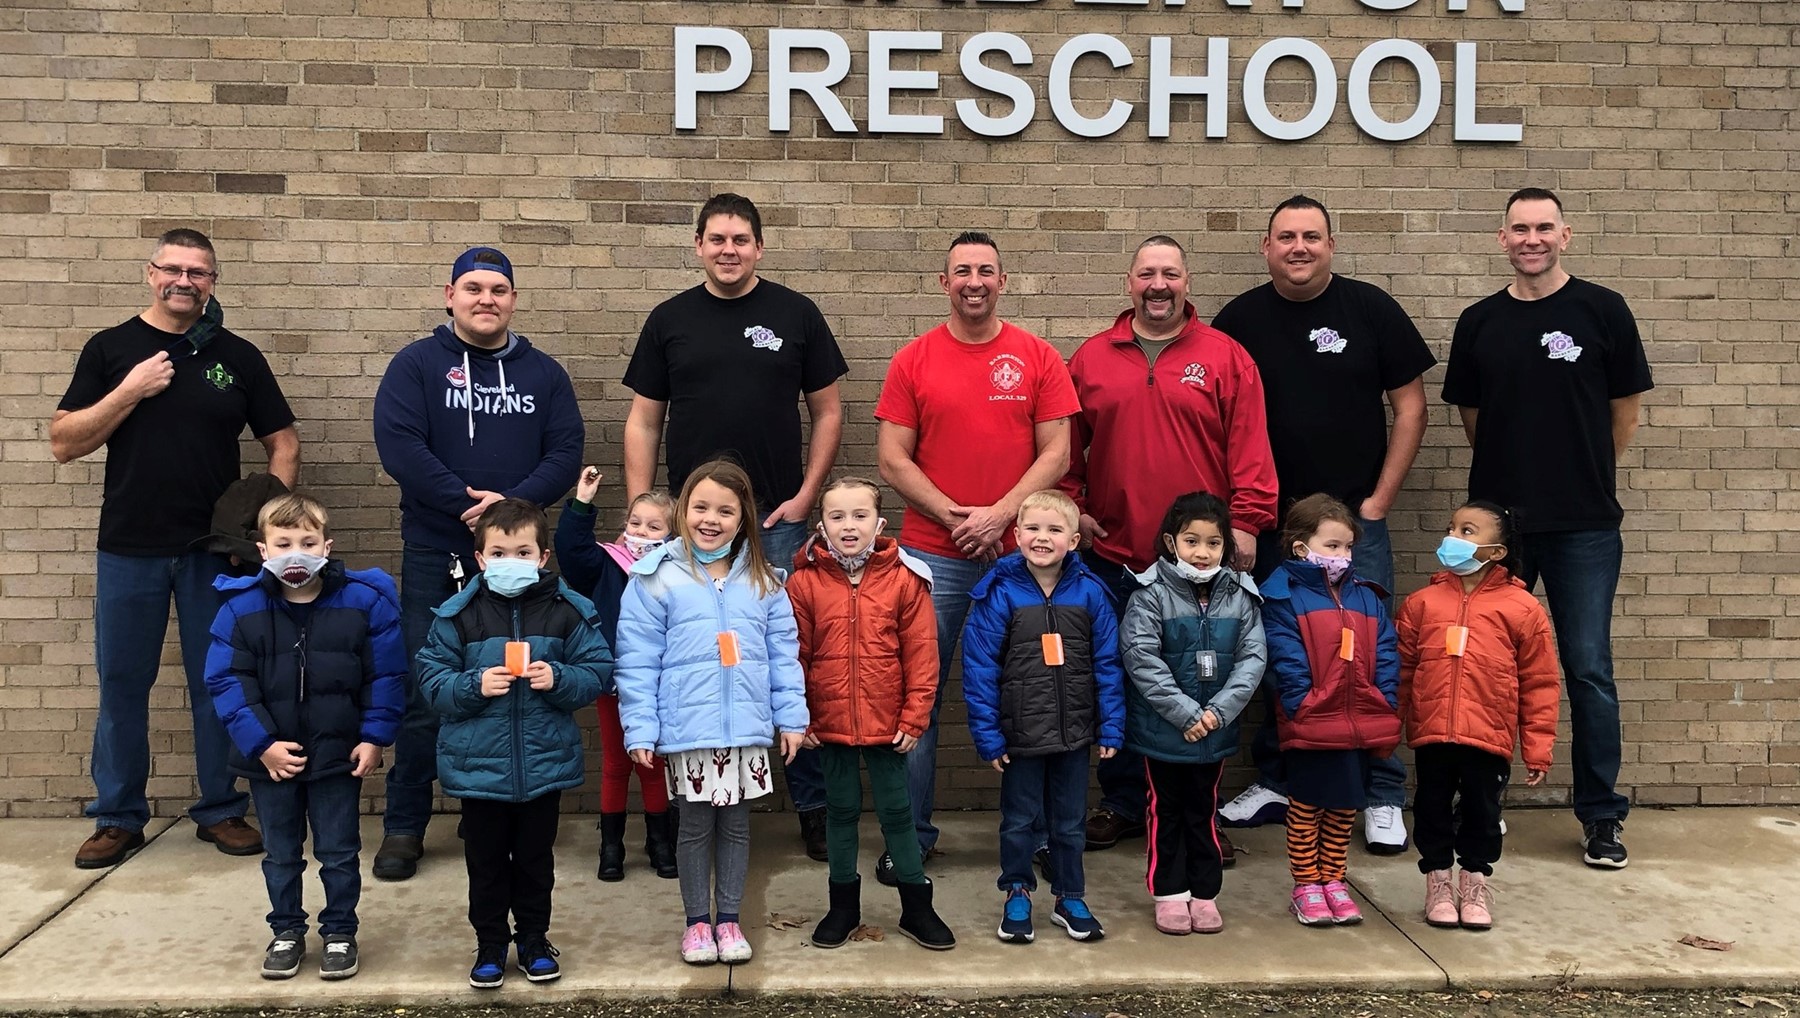 Barberton Firefighters Local #329 purchased new winter coats for all Barberton Preschool students! 